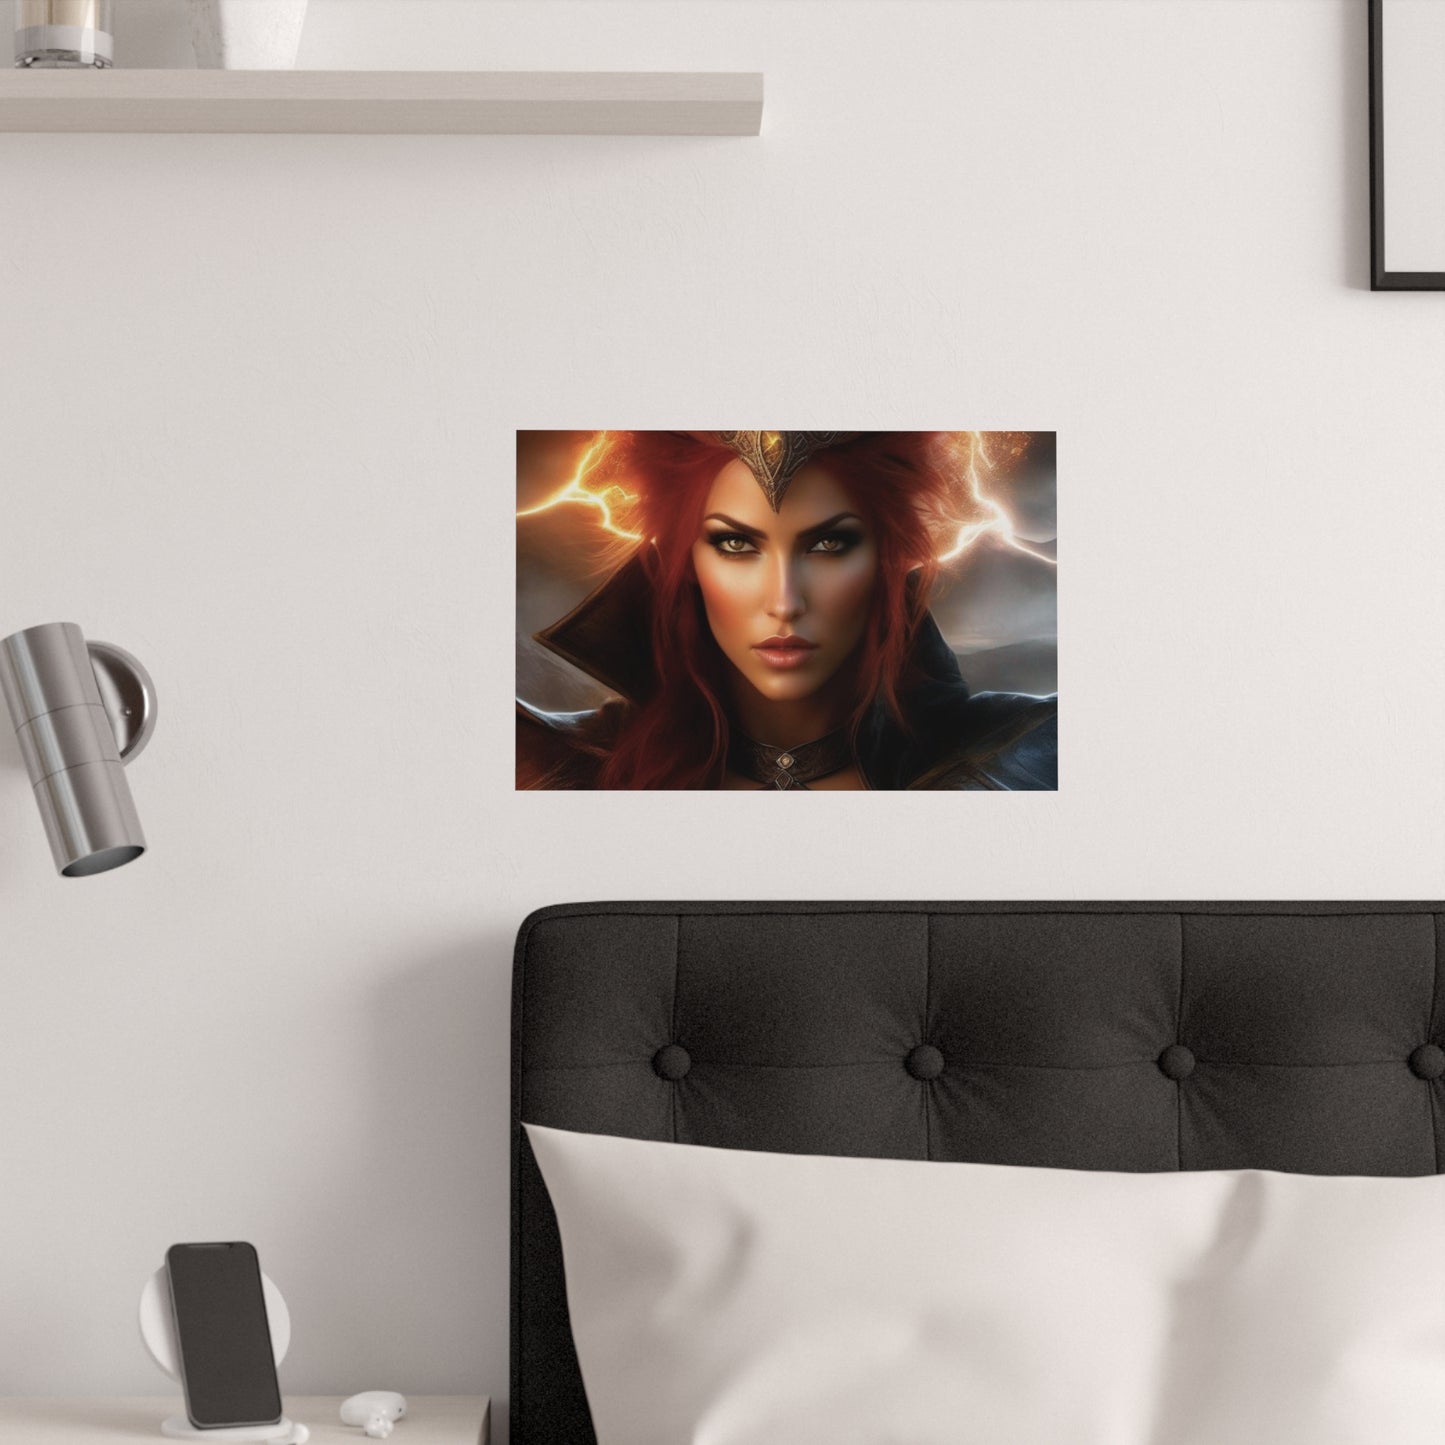 Redheaded Lightning Queen Satin Posters (210gsm)